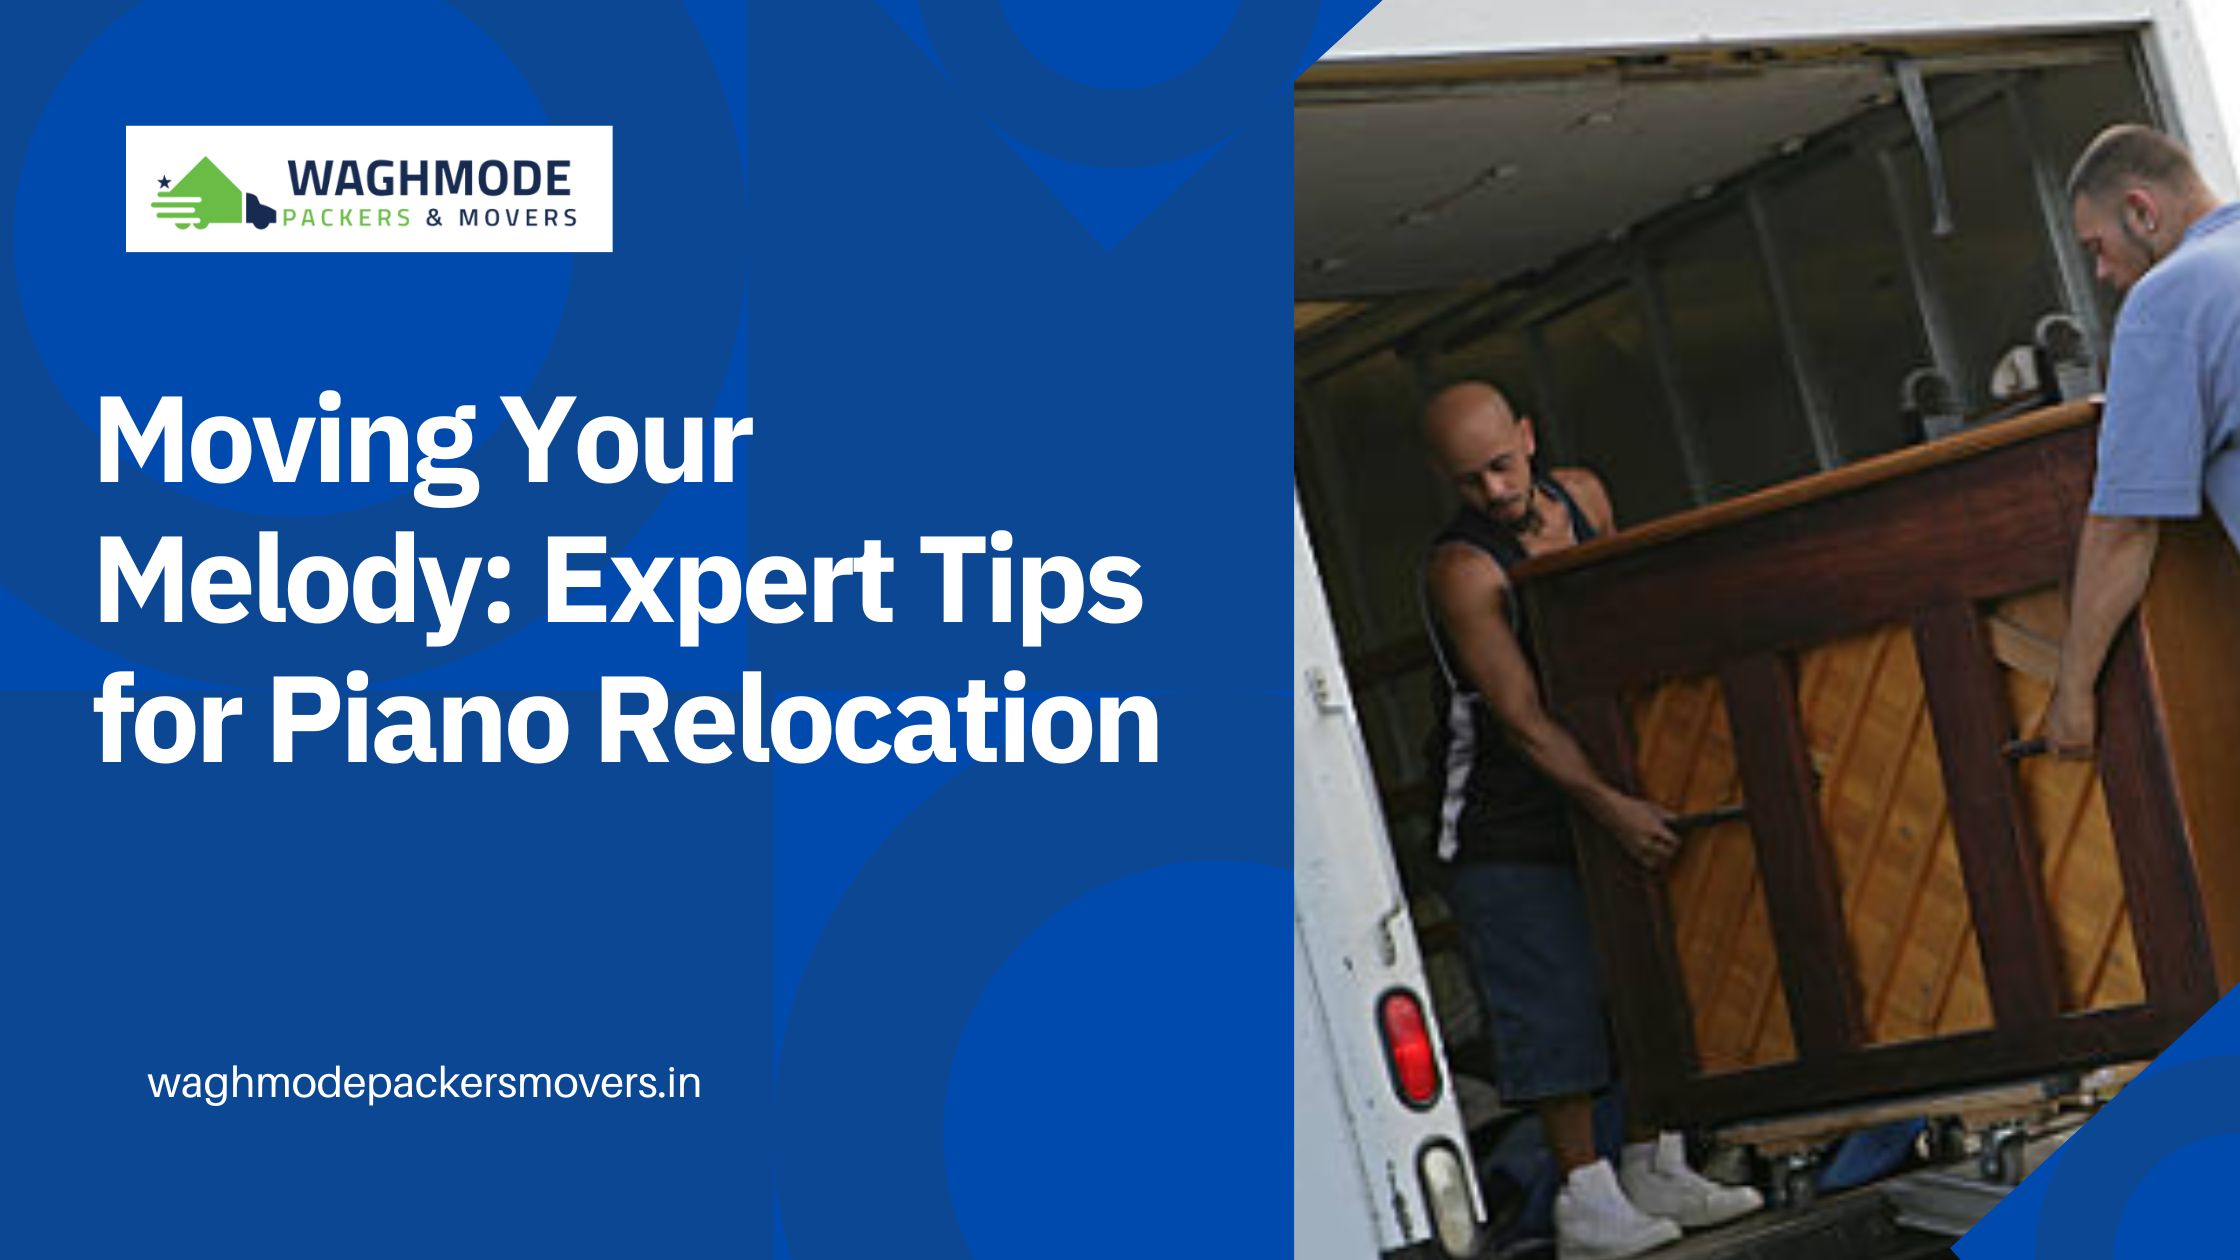 Moving Your Melody: Expert Tips for Piano Relocation